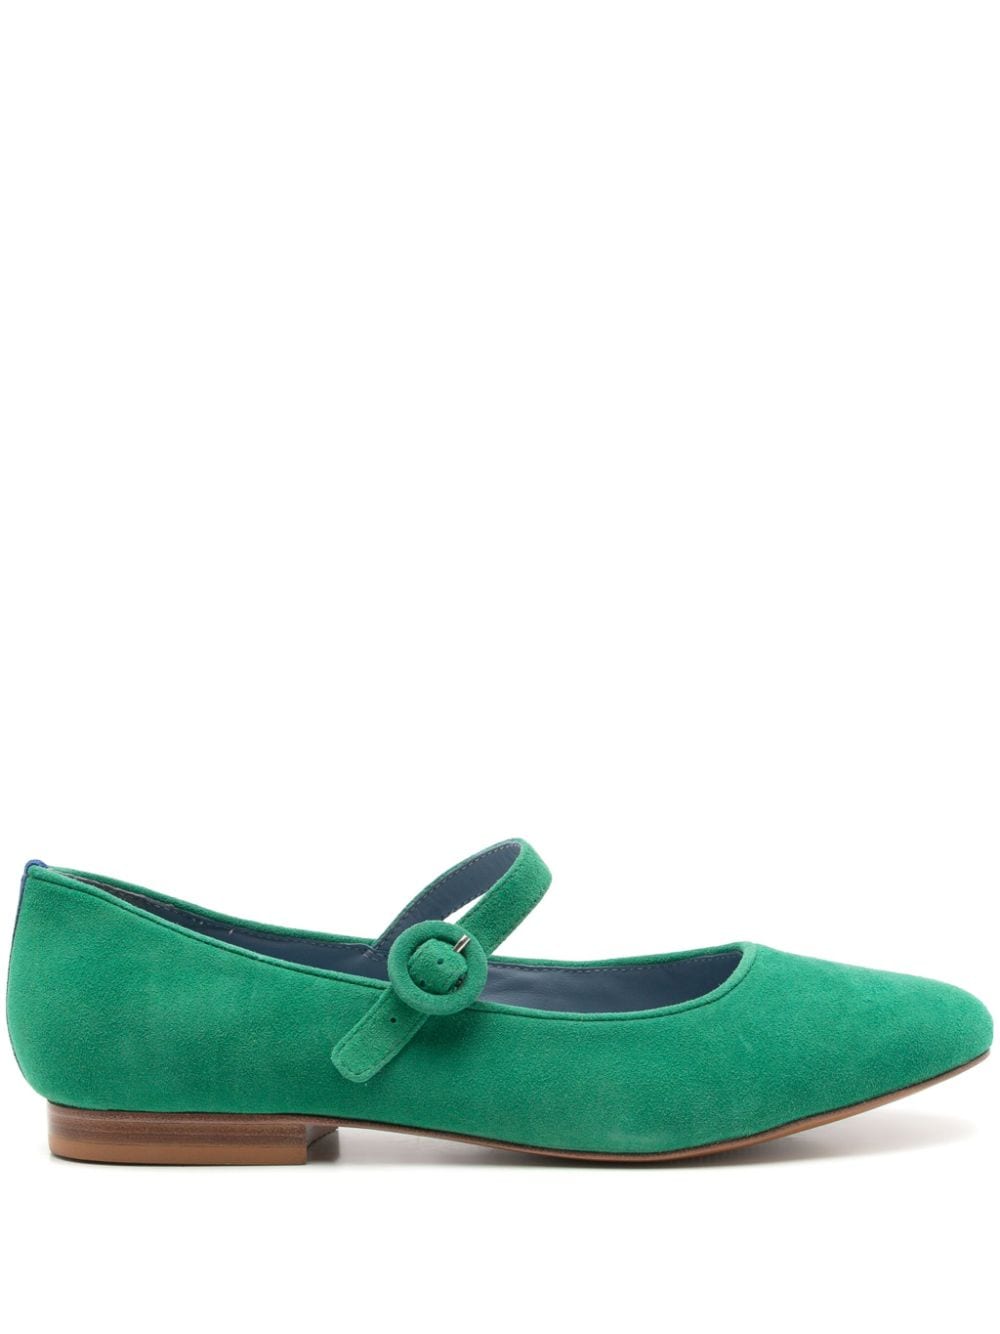 Blue Bird Shoes Doll Suede Ballerina Shoes In Green